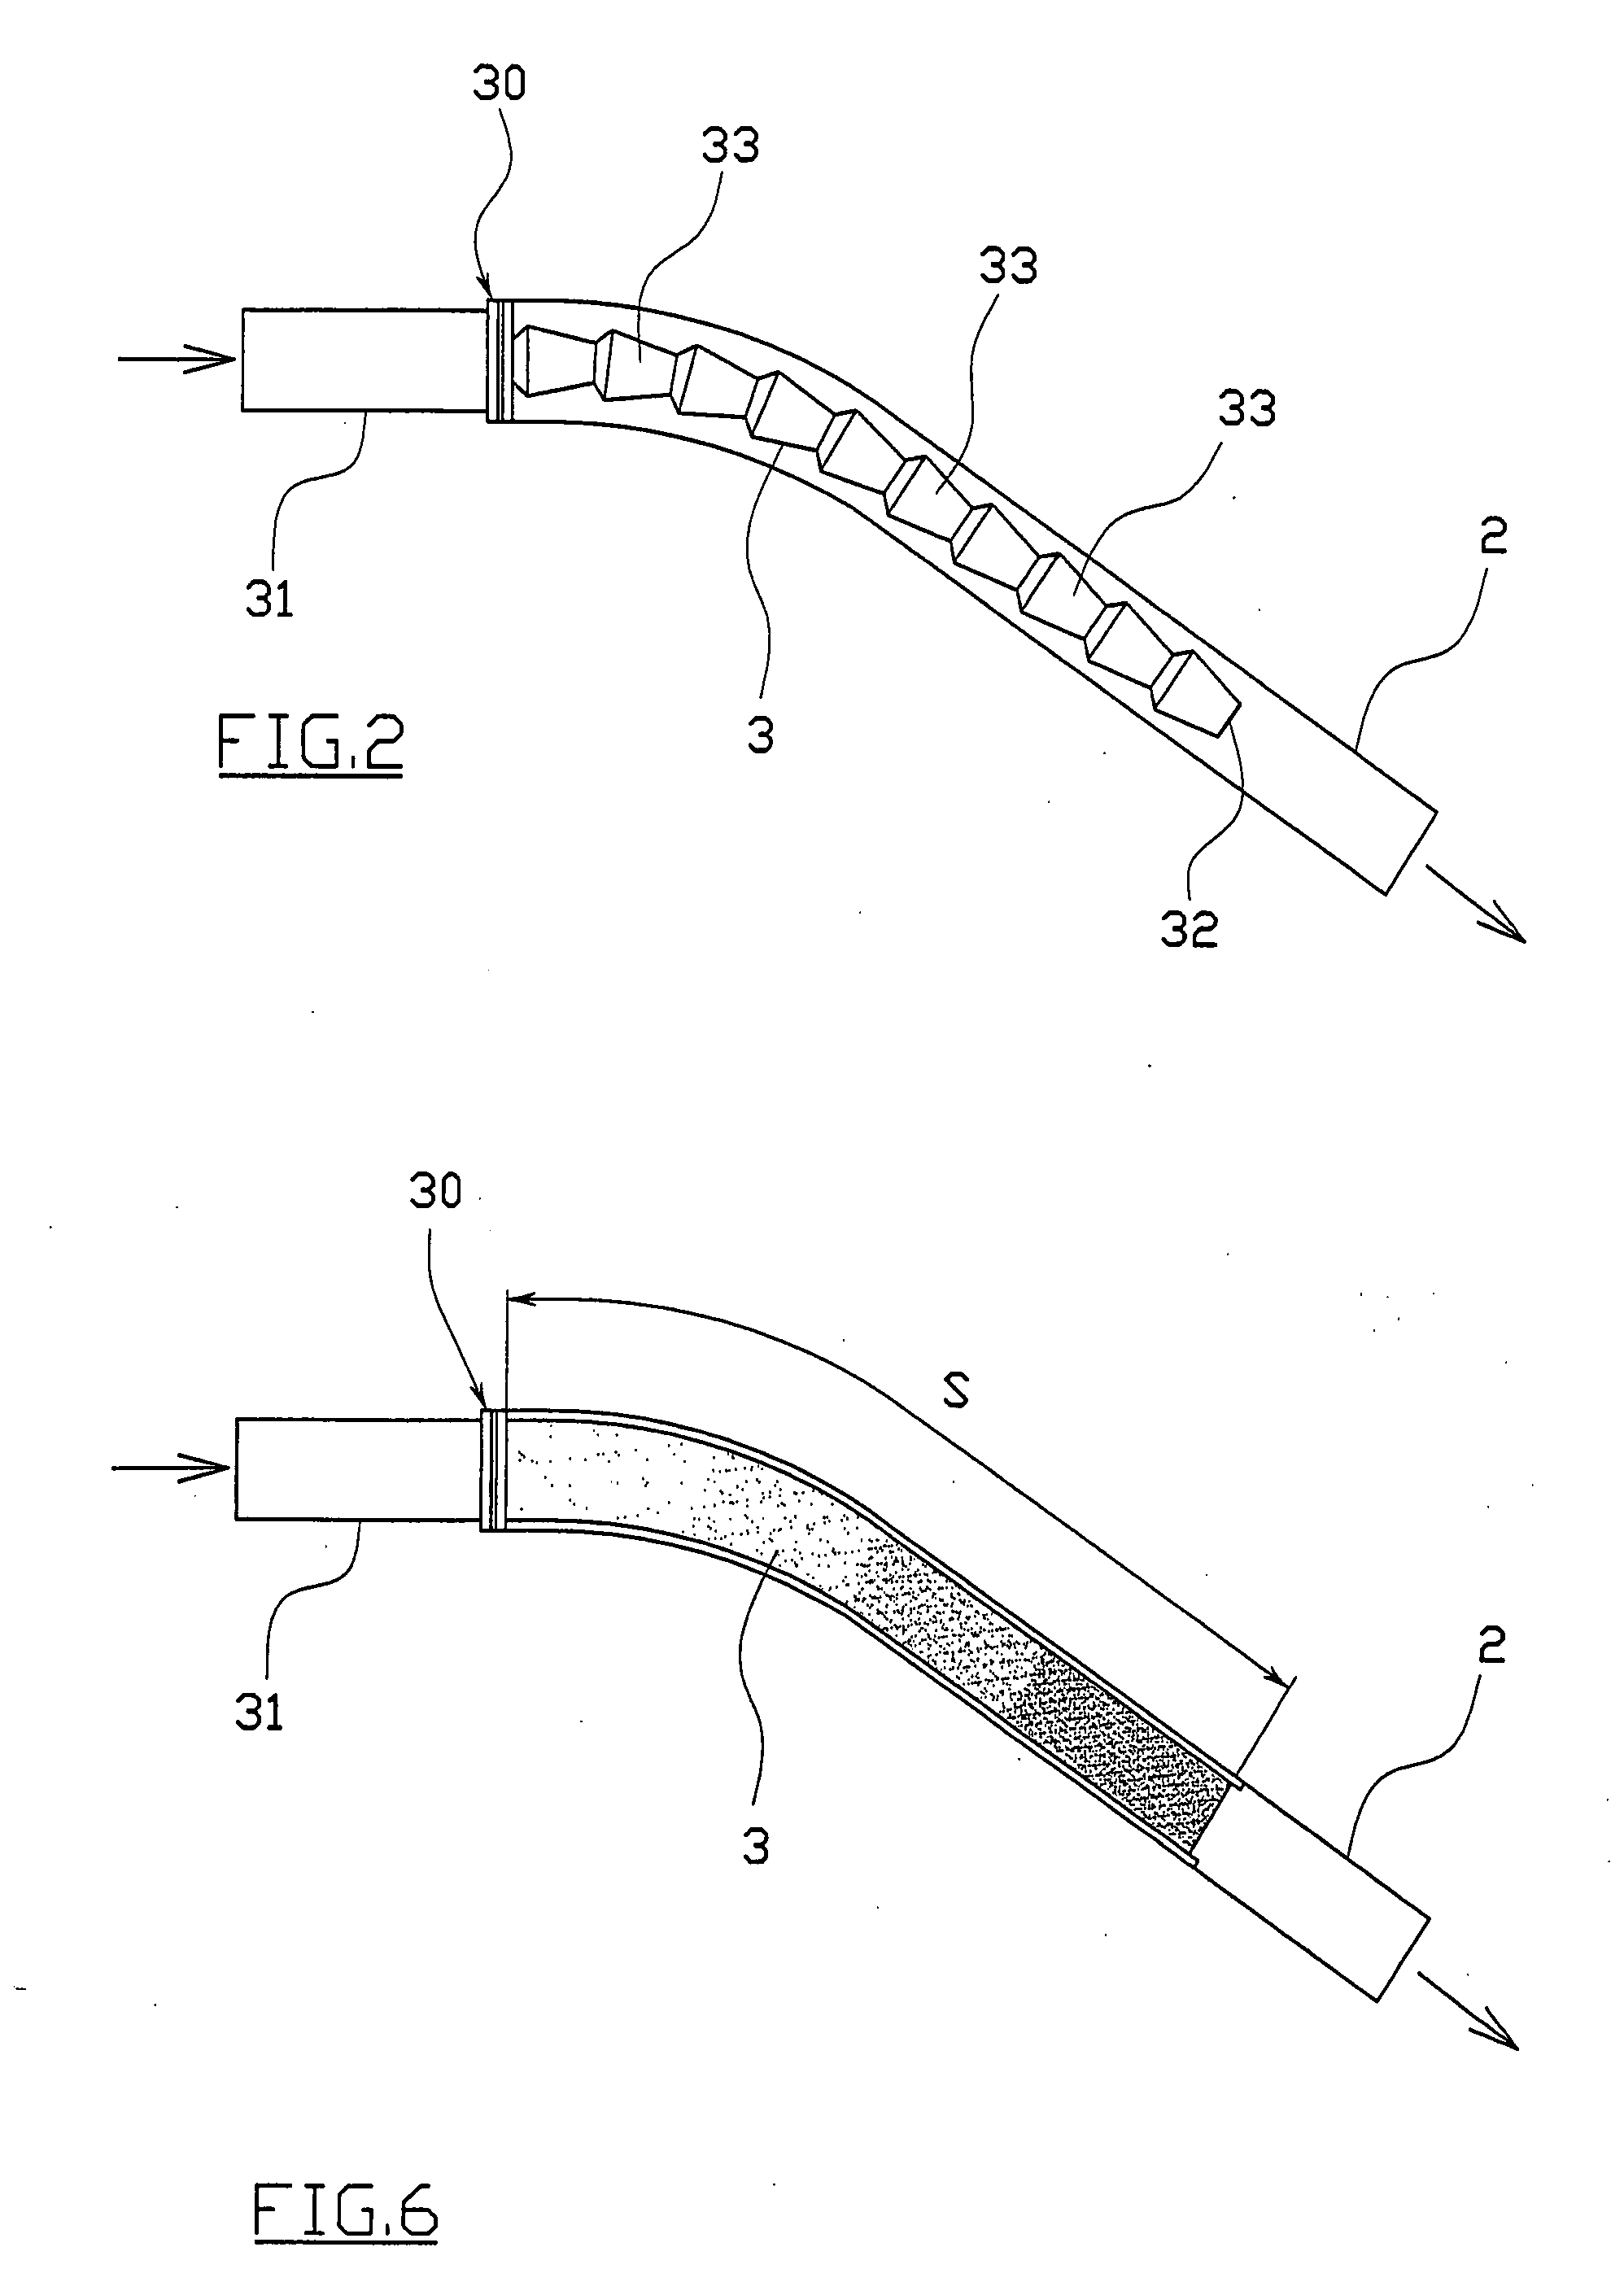 Filtering System for the Air Directed Towards an Internal Combustion Engine Intake